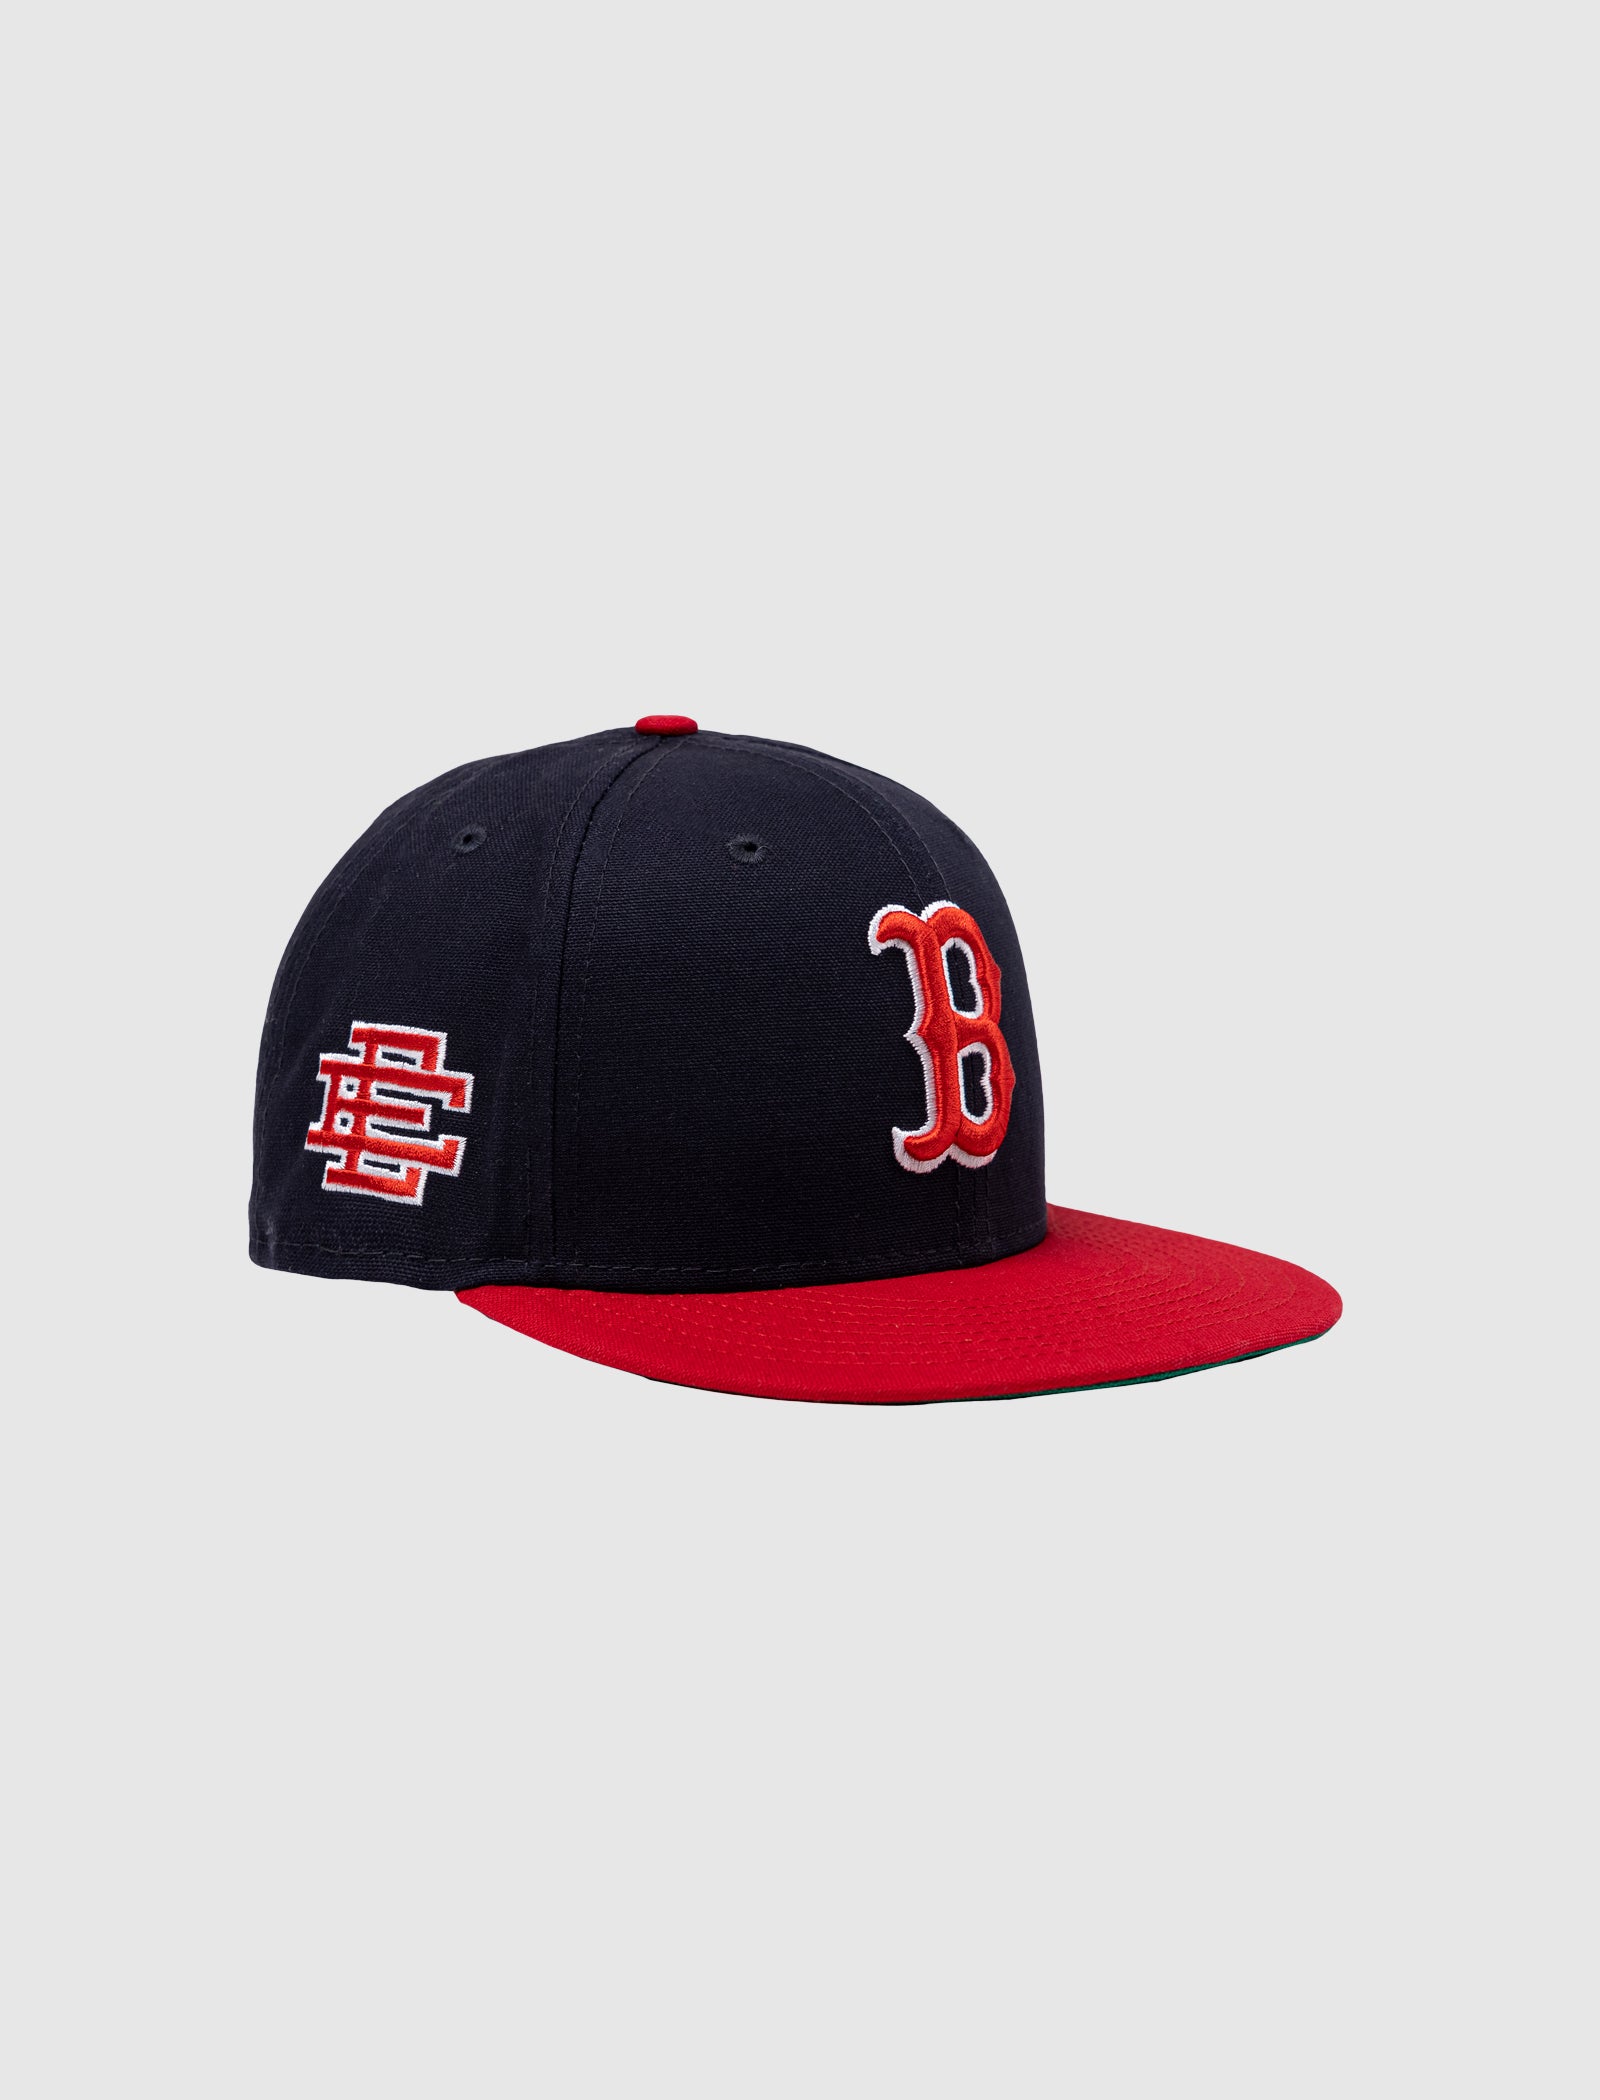 ERIC EMANUEL RED SOX FITTED HAT